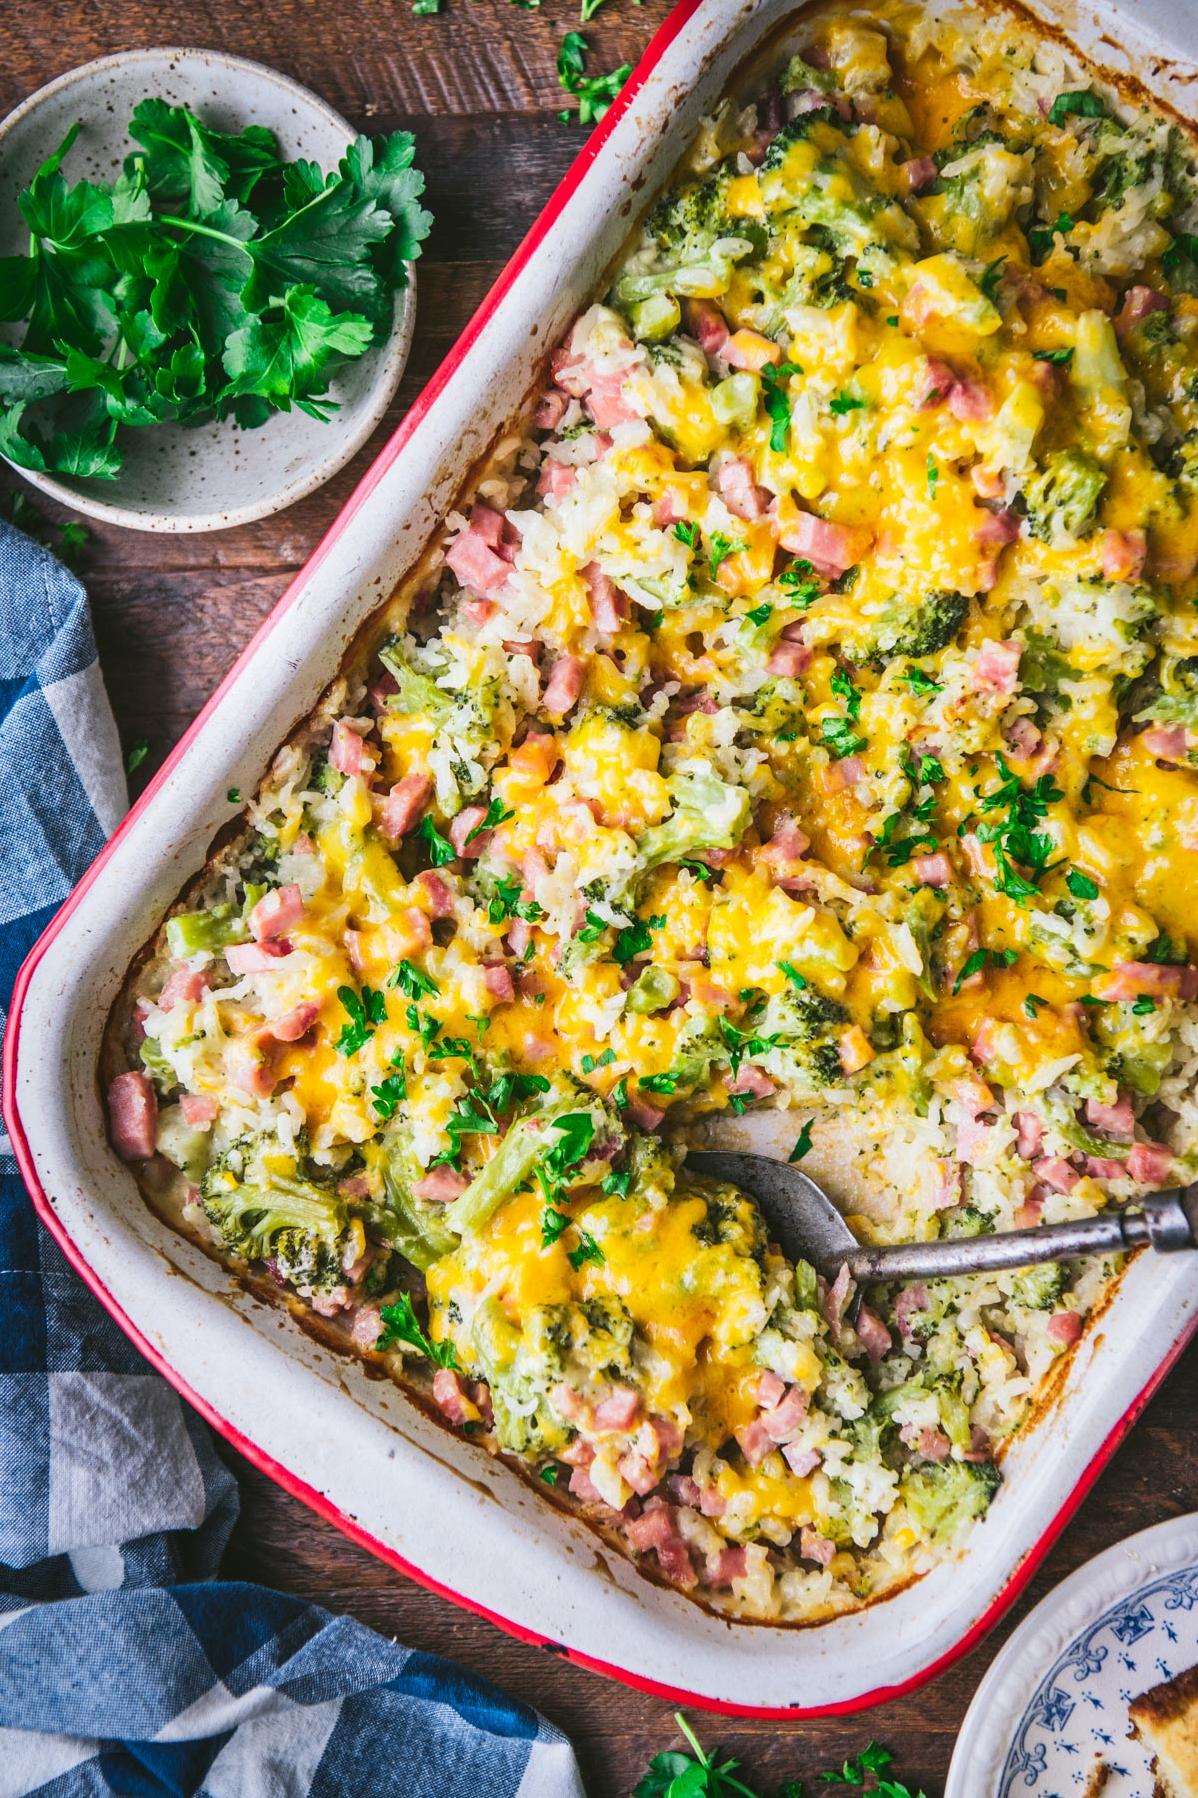  Perfect for a big family dinner, this casserole recipe is easy to make and even easier to love.